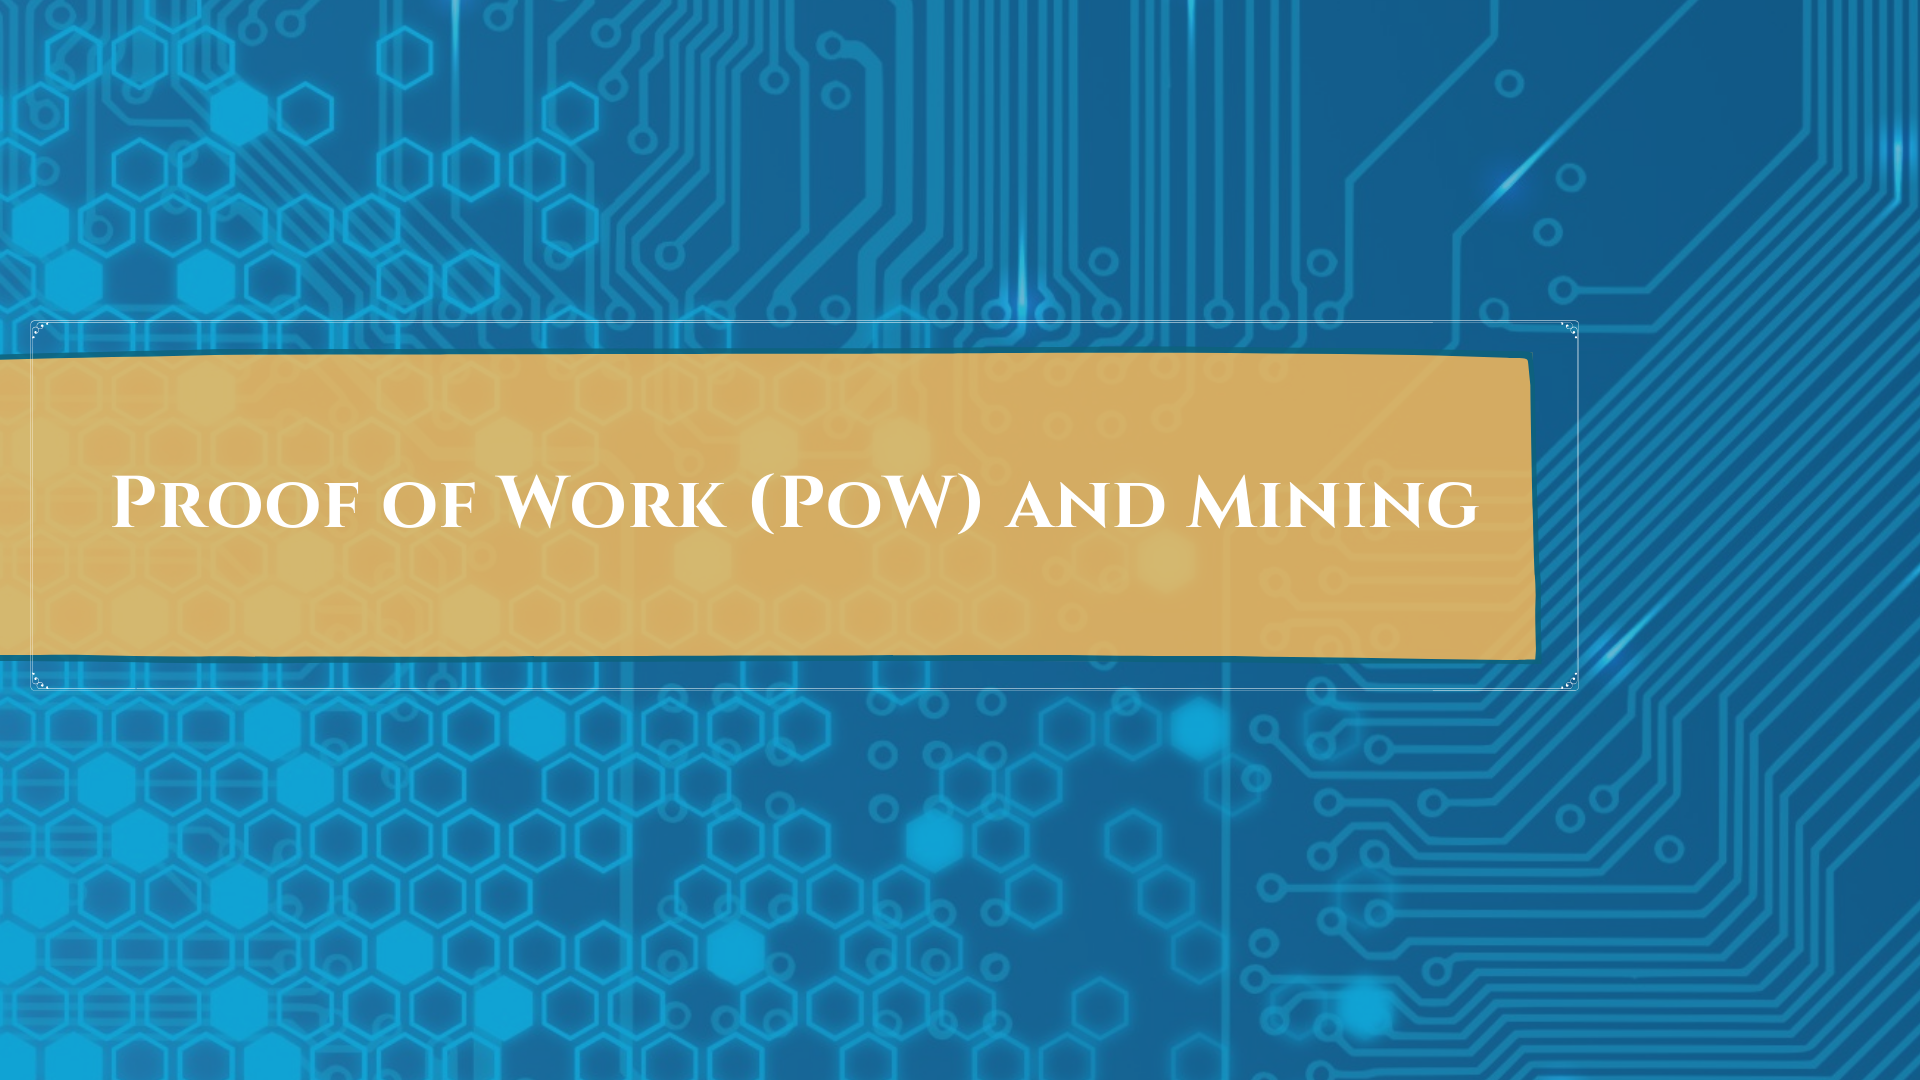 Proof of Work (PoW) and Mining